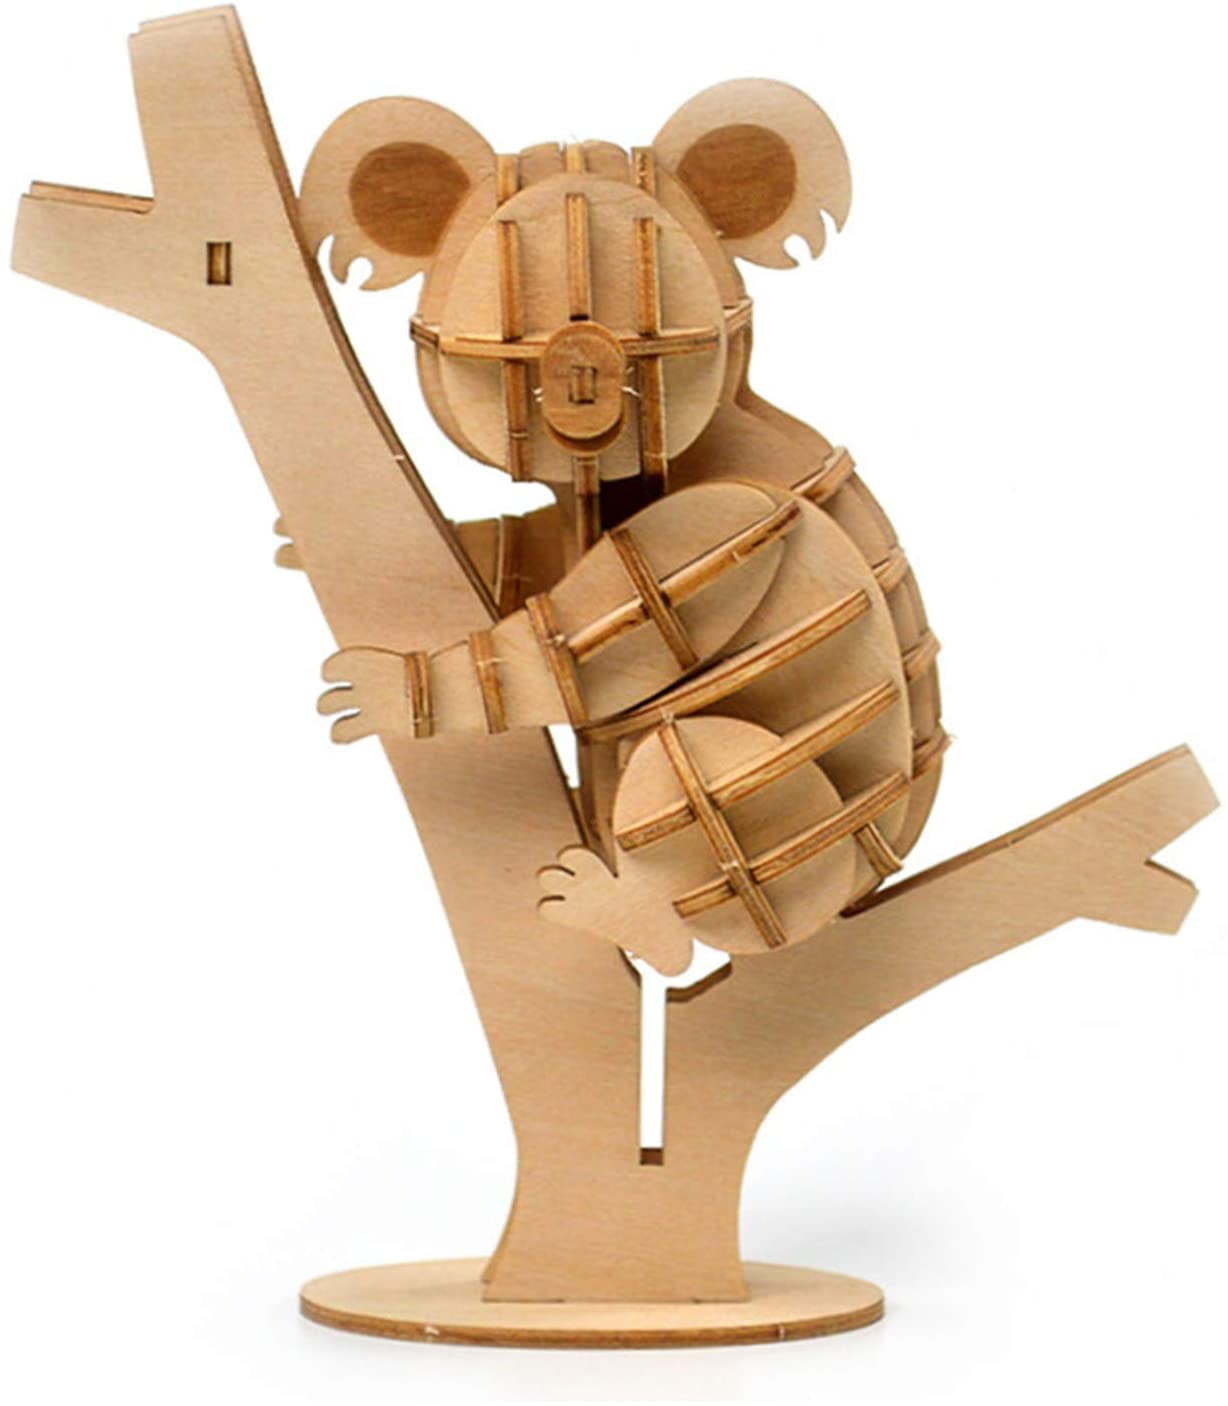 Details about   Wooden Jigsaw Puzzles Unique Koala Animal Jigsaw Pieces Gift for Adults and Kids 